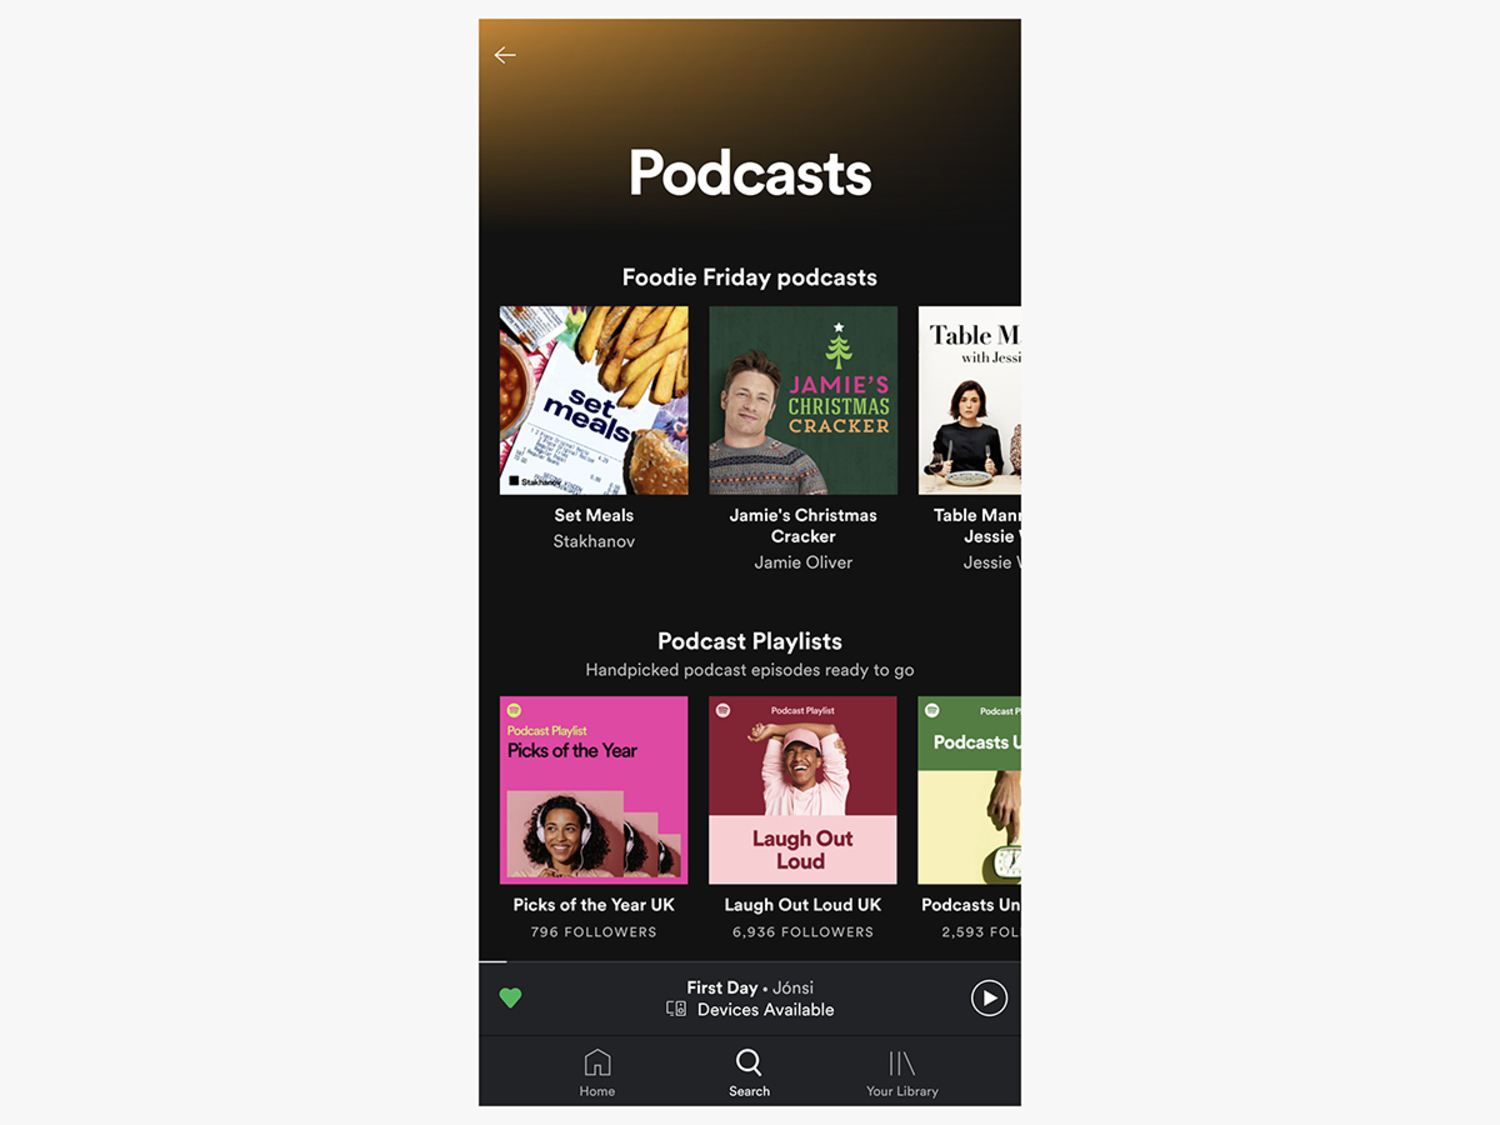 The Spotify app interface showing various podcasts.